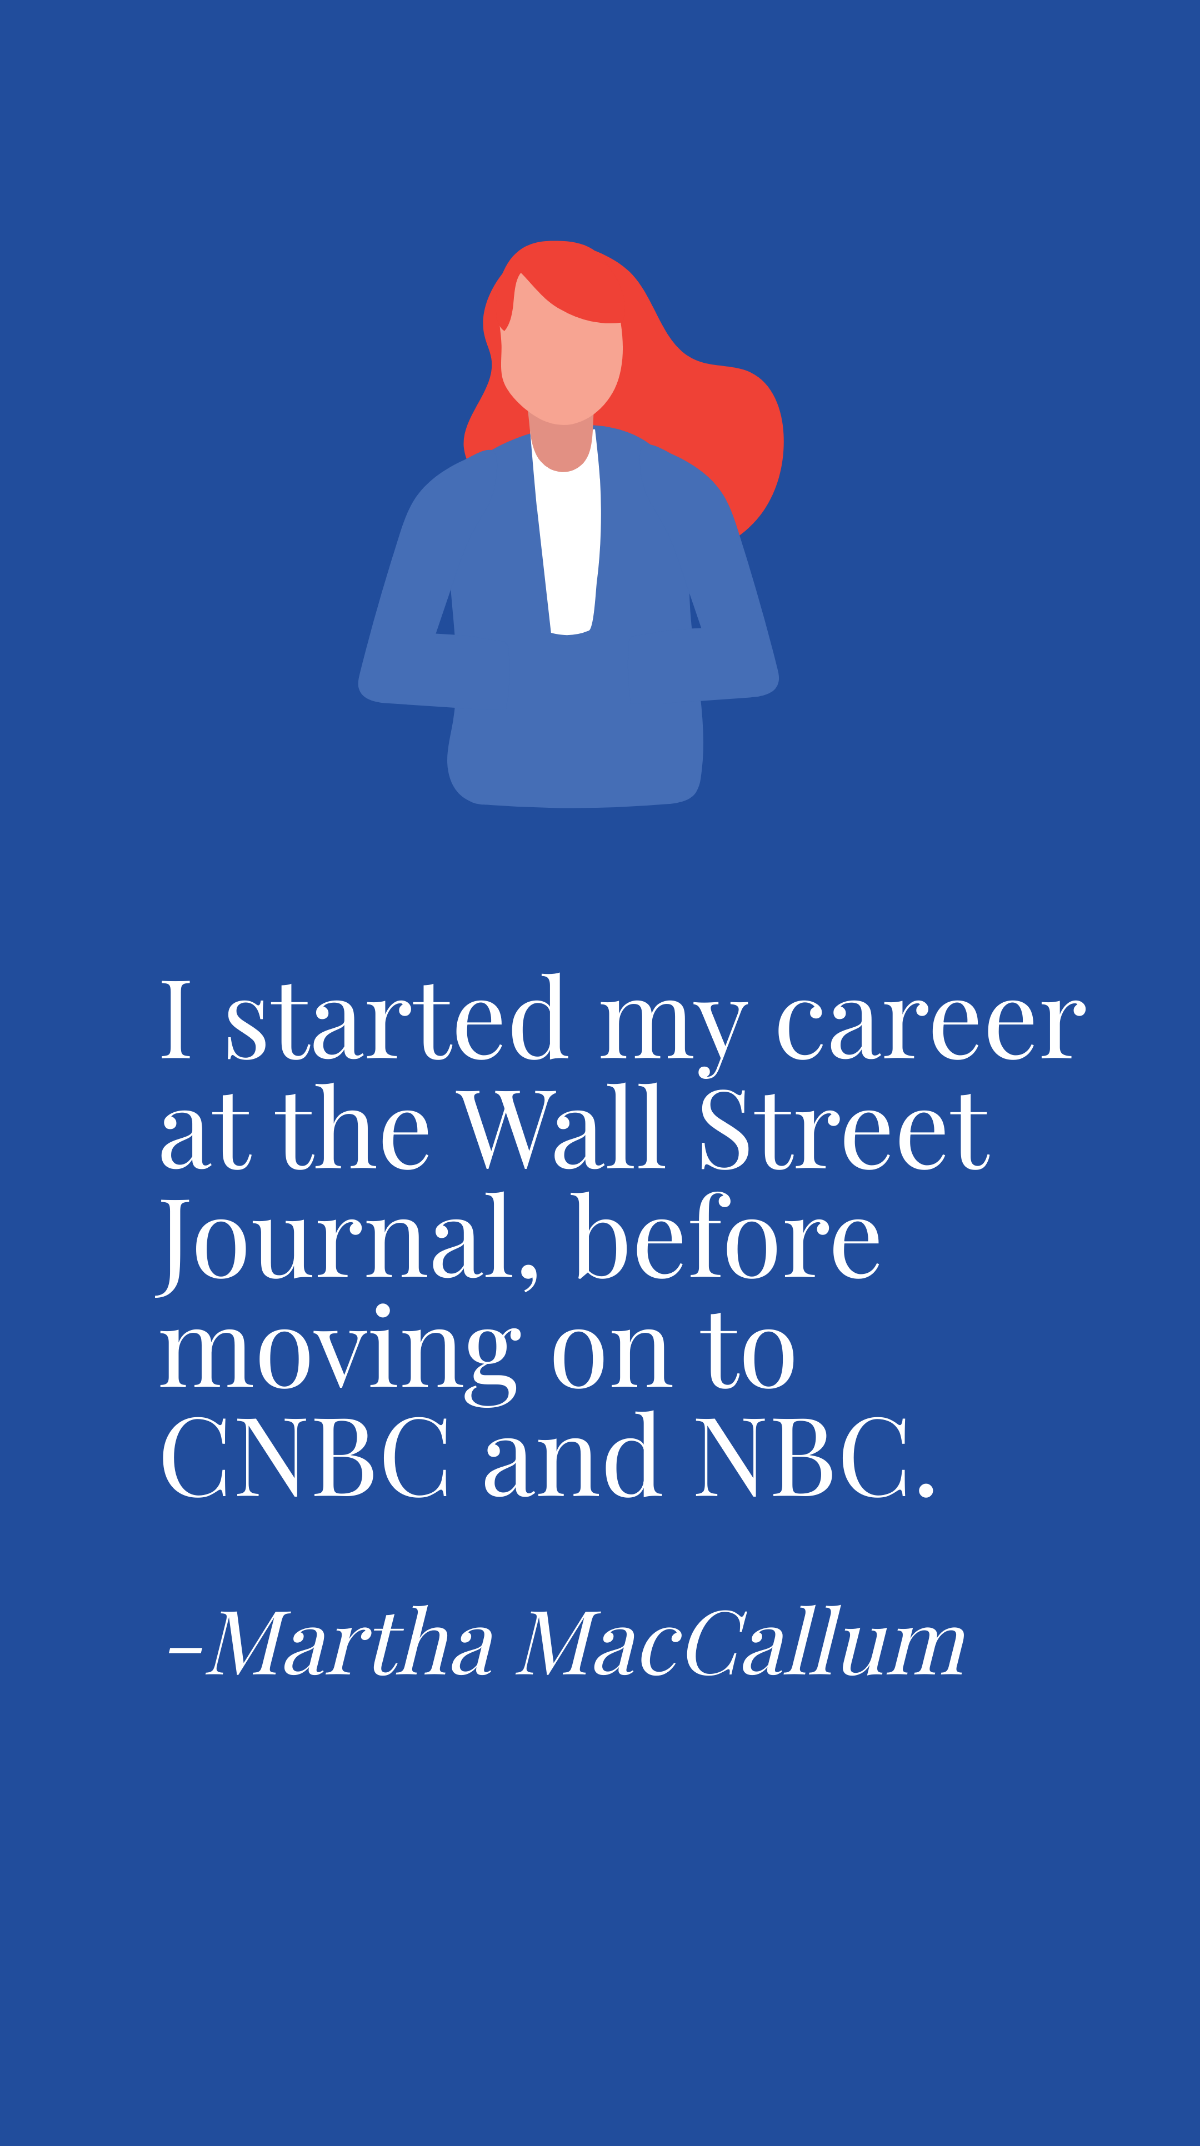 Martha MacCallum - I started my career at the Wall Street Journal, before moving on to CNBC and NBC. Template